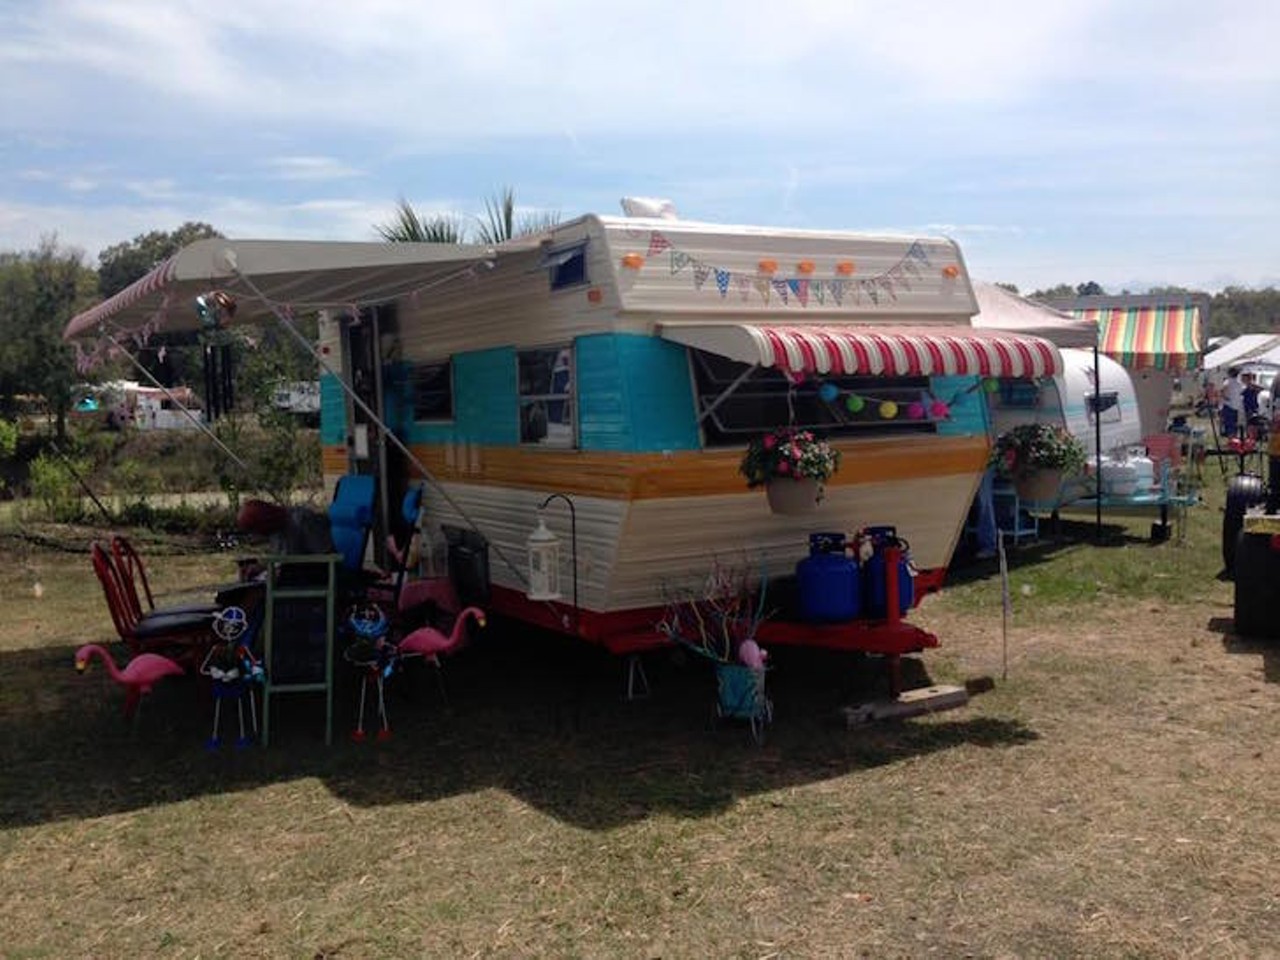 March 17-18
Vintage RV & Hot Rod Show See vintage RVs, glamping trailers, hot rods and more. 9 am-5 pm; Renninger's Antique Center, 20651 U.S. Highway 441, Mount Dora; free; 352-383-8393.
Photo via Renee Saenz Morgan? via Vintage RV & Hot Rod Antiques Show- Glamping Event Facebook